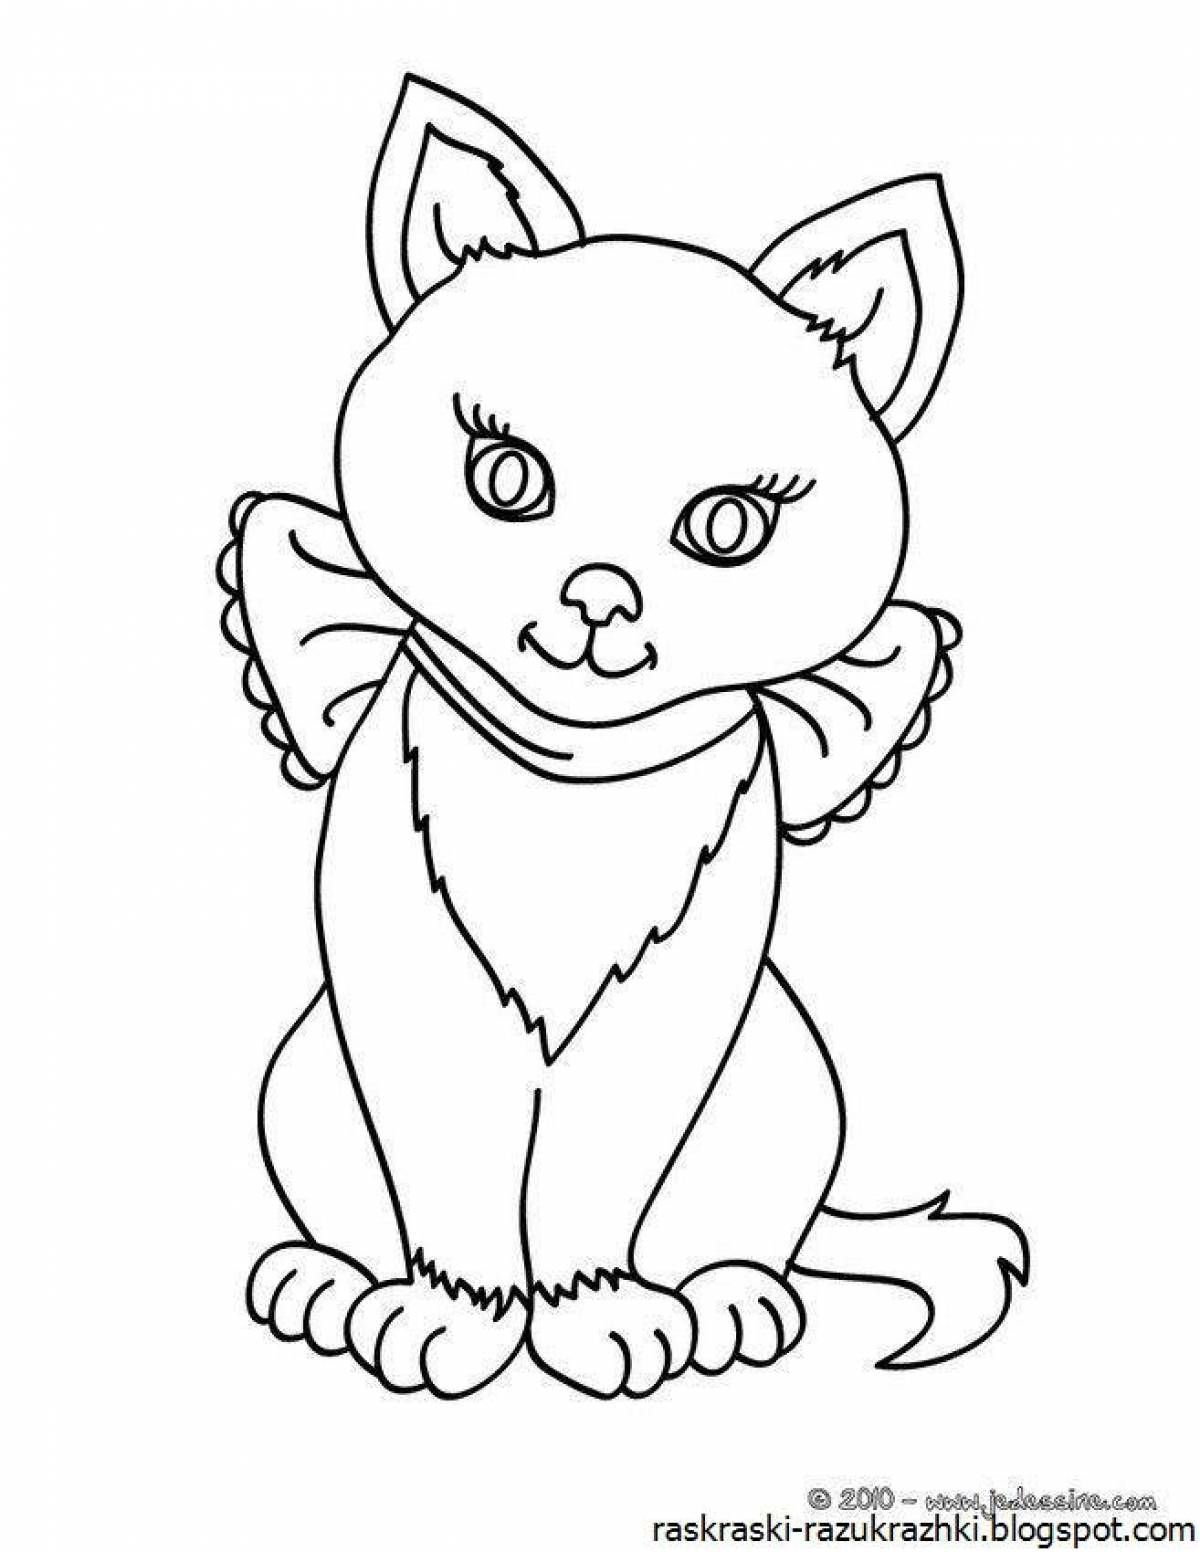 Silly coloring pages for girls, kittens